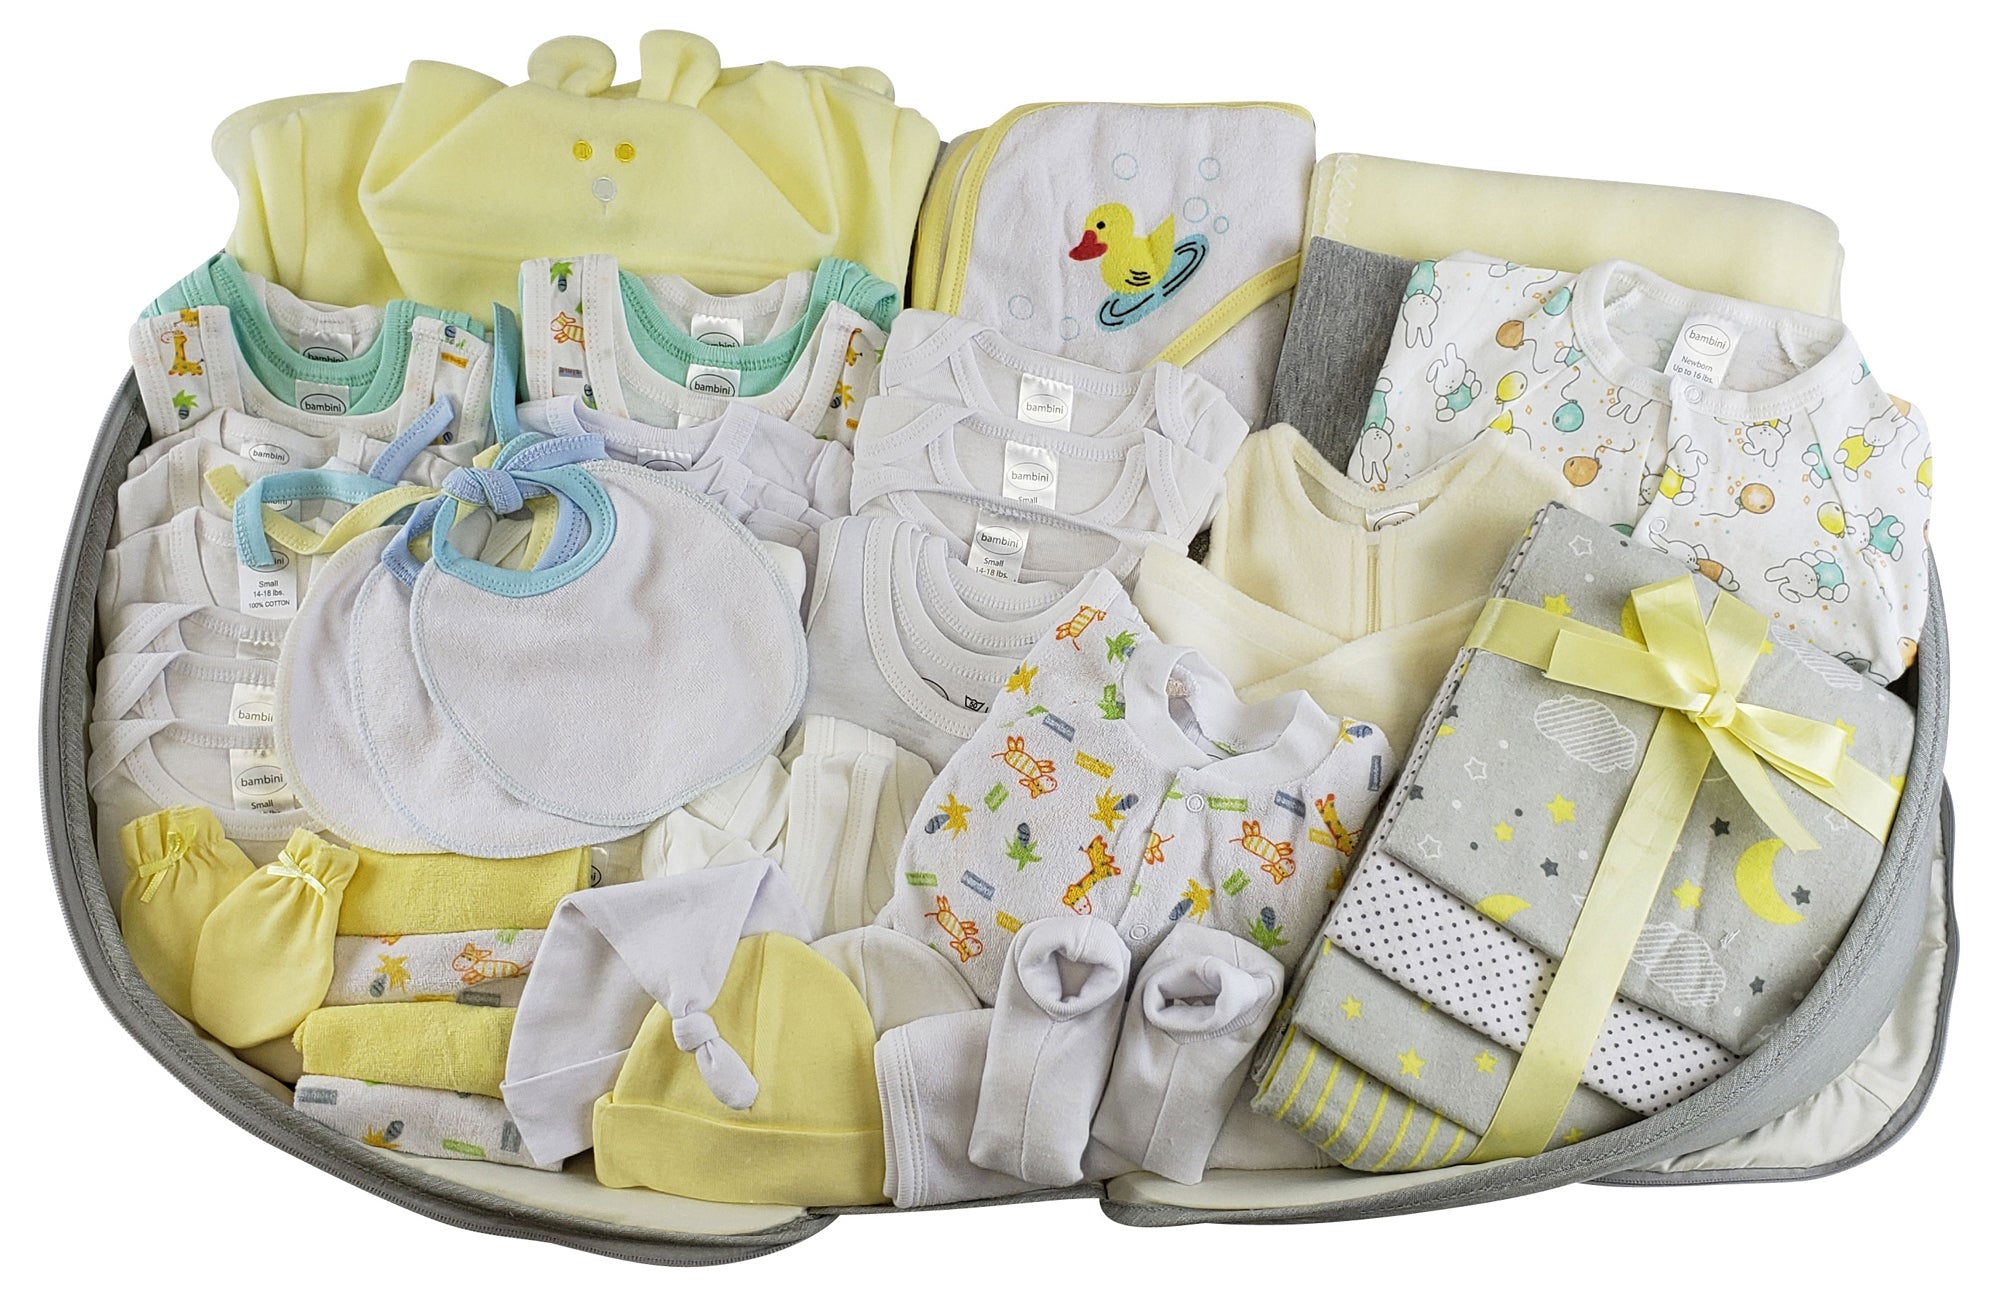 Unisex 62 pc Baby Clothing Starter Set With Diaper Bag